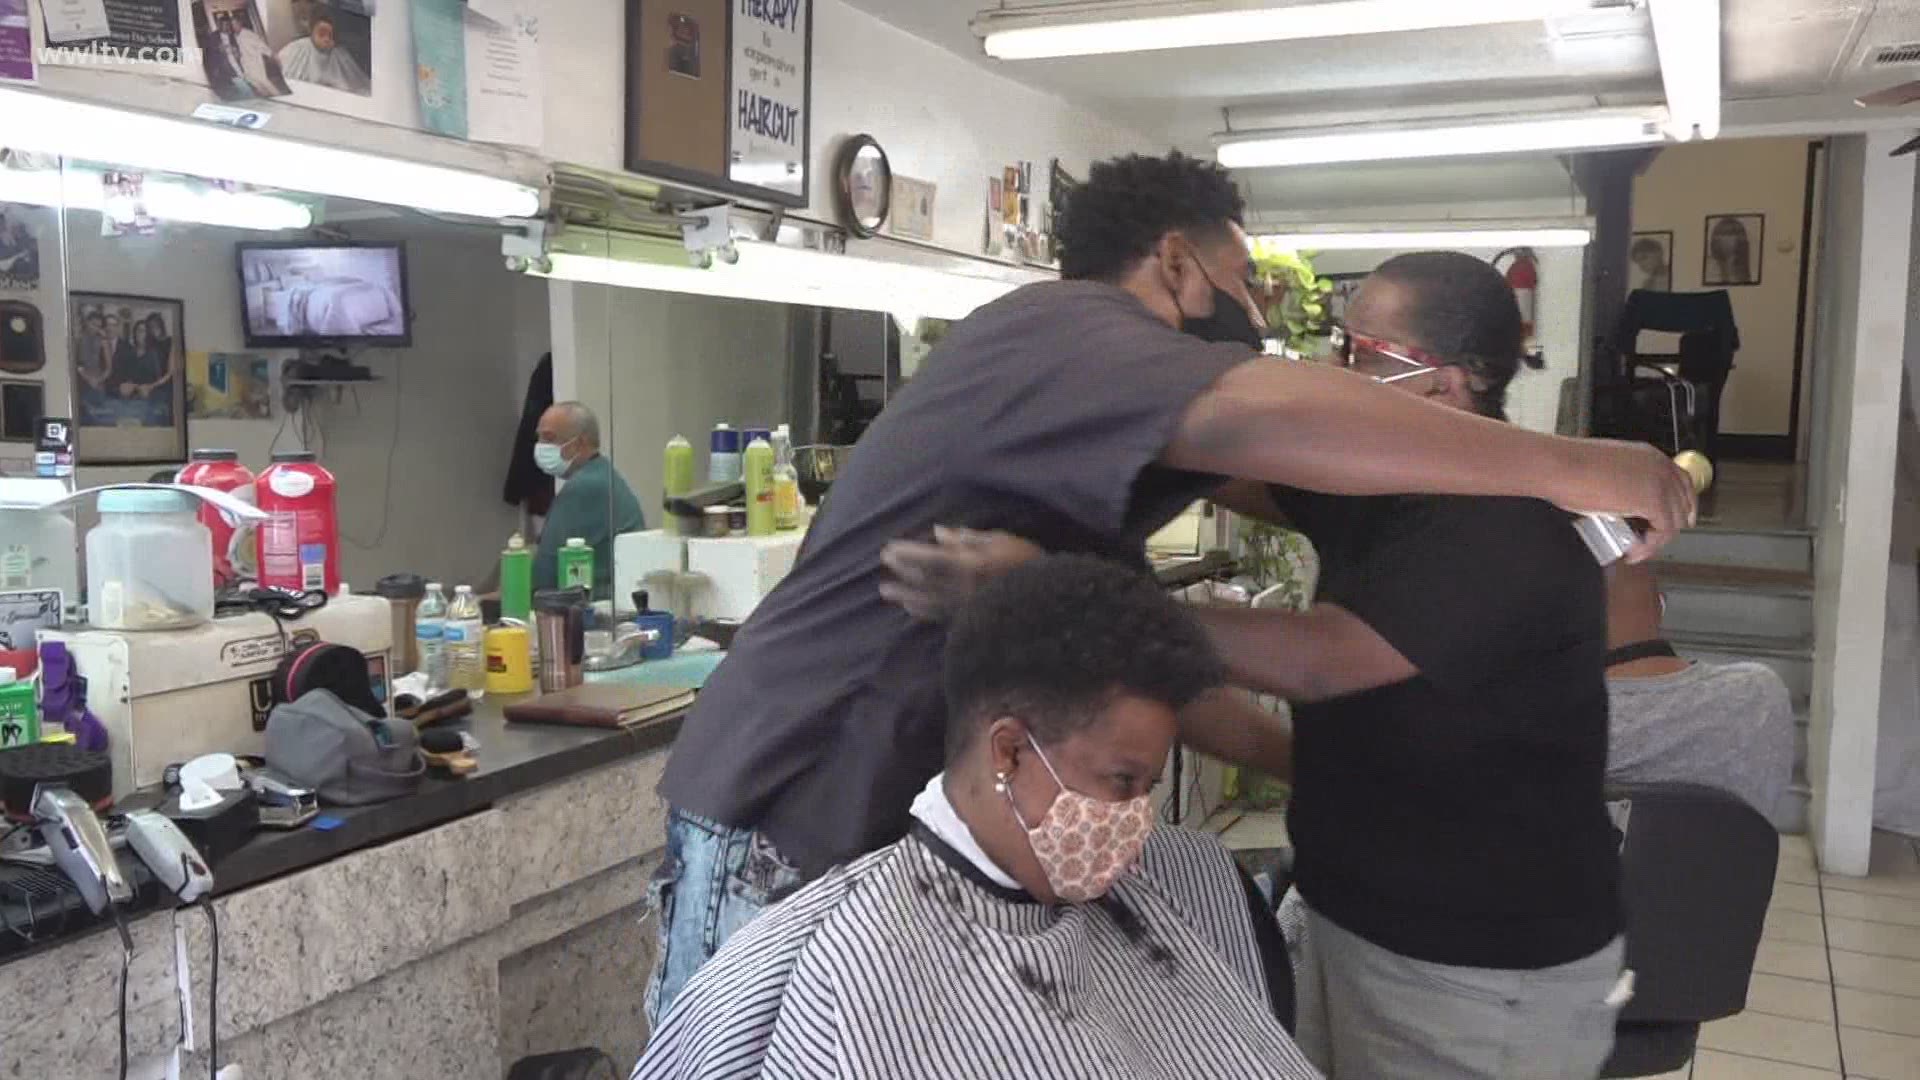 New Orleans barber calls on other barbers to inspire kids, hoping to decrease crime